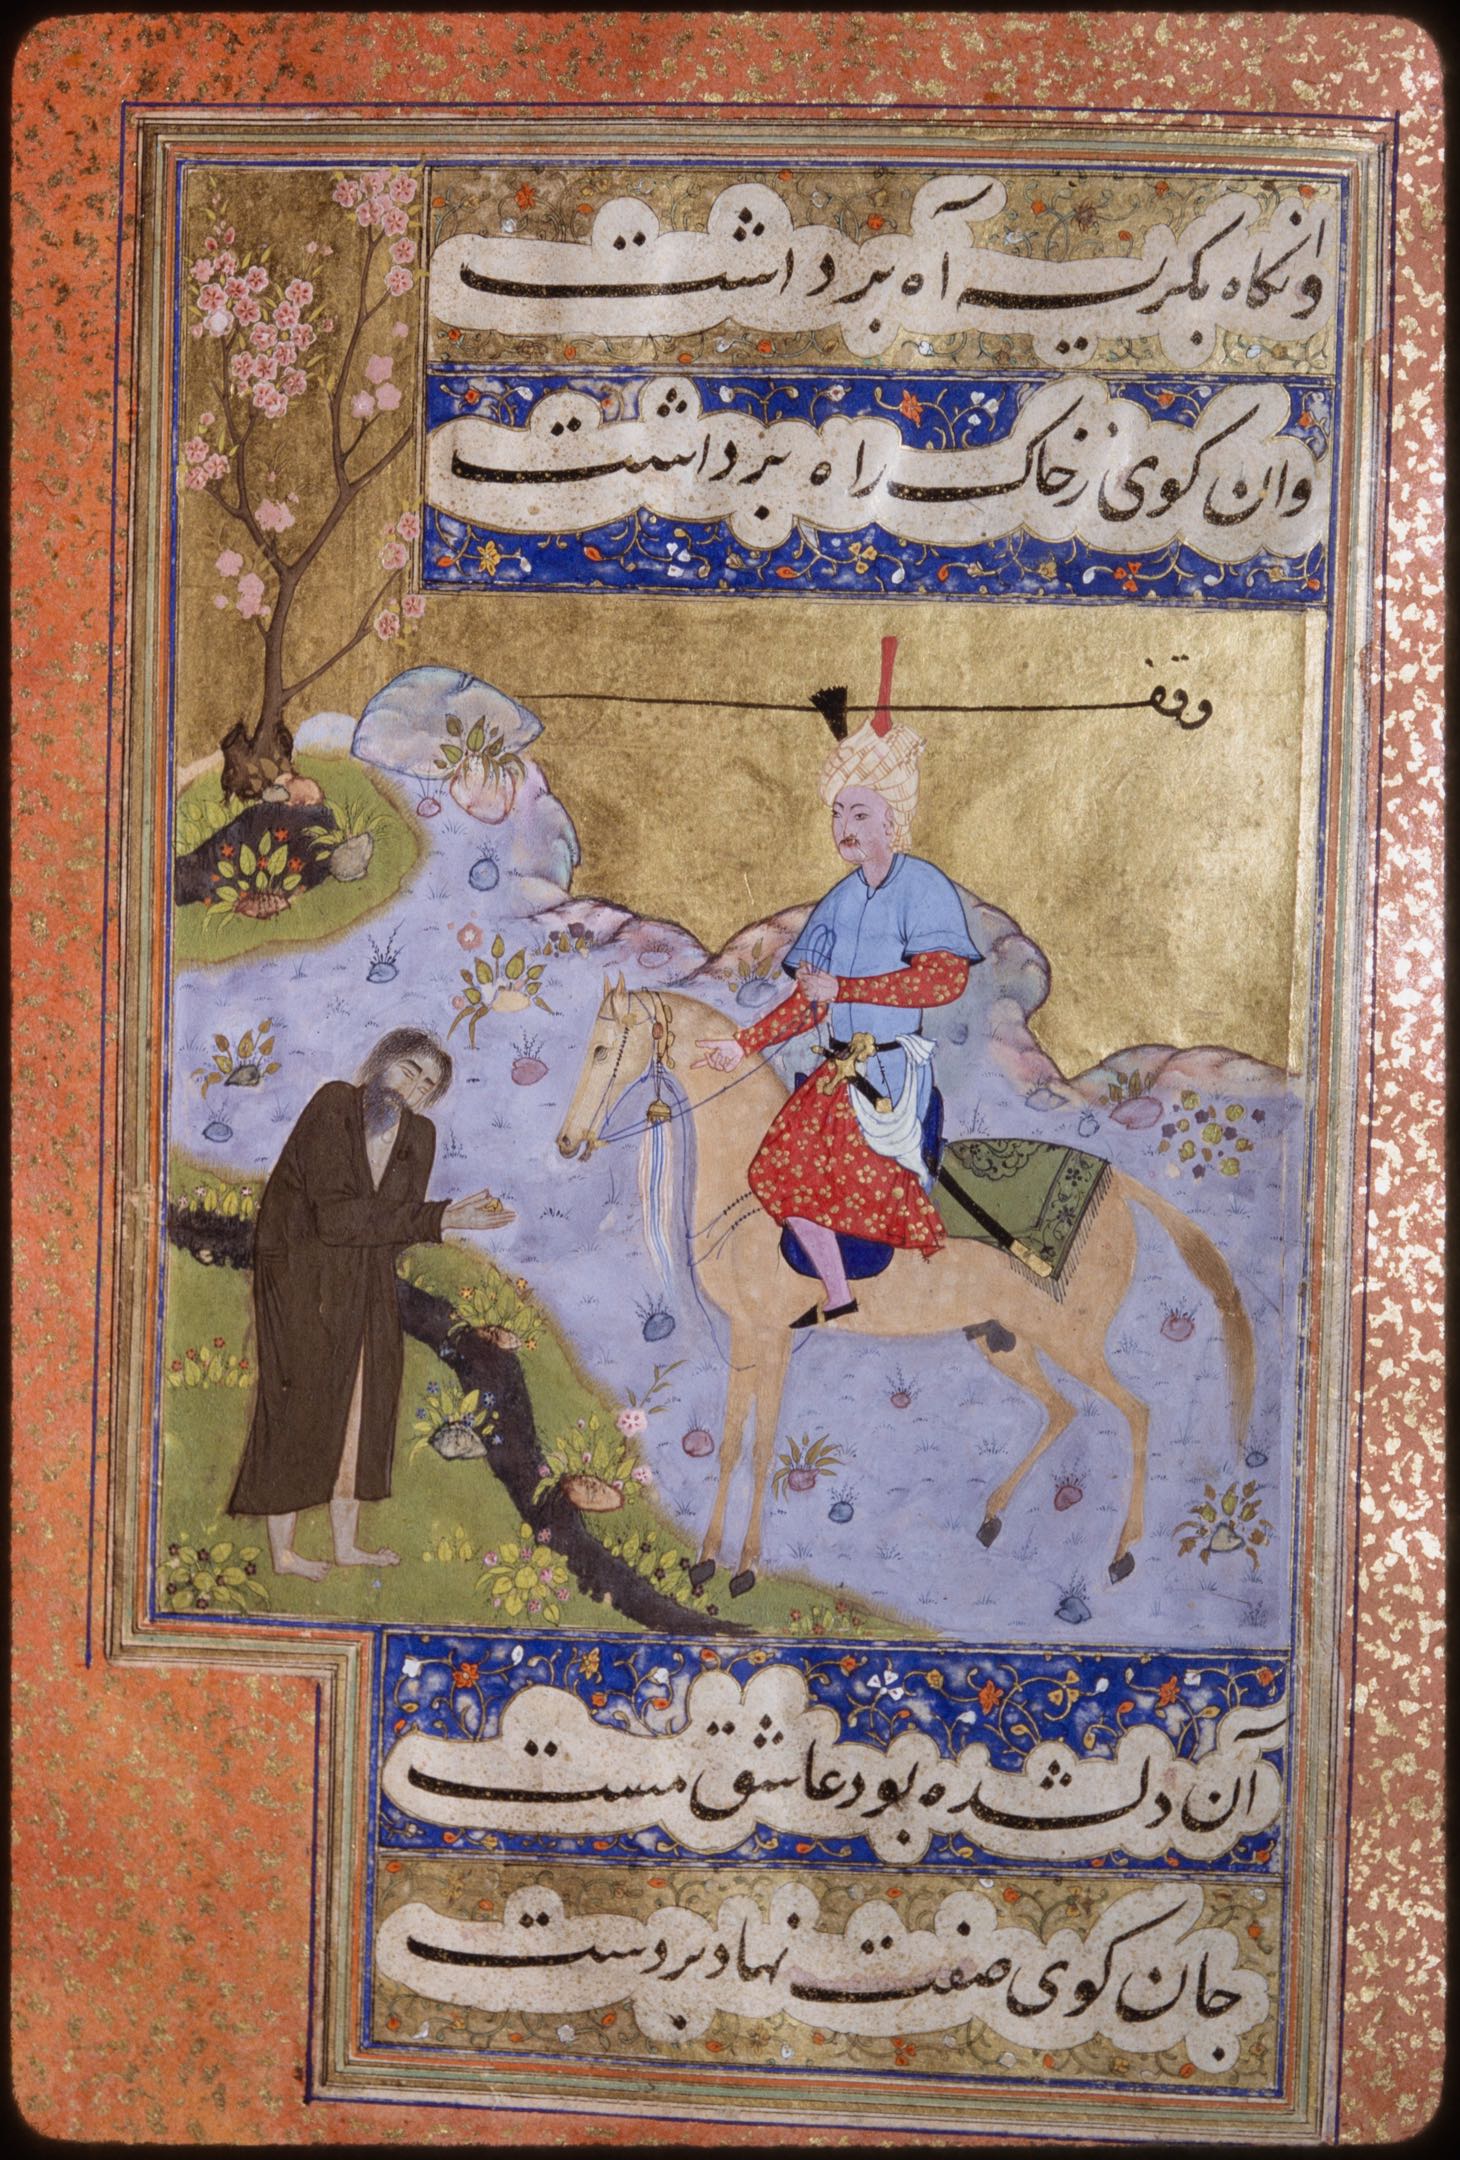 The Prince Accepts a Polo Ball from a Dervish, from Guy o Chawgan (National Library of Russia, St. Petersburg, Dorn 441)